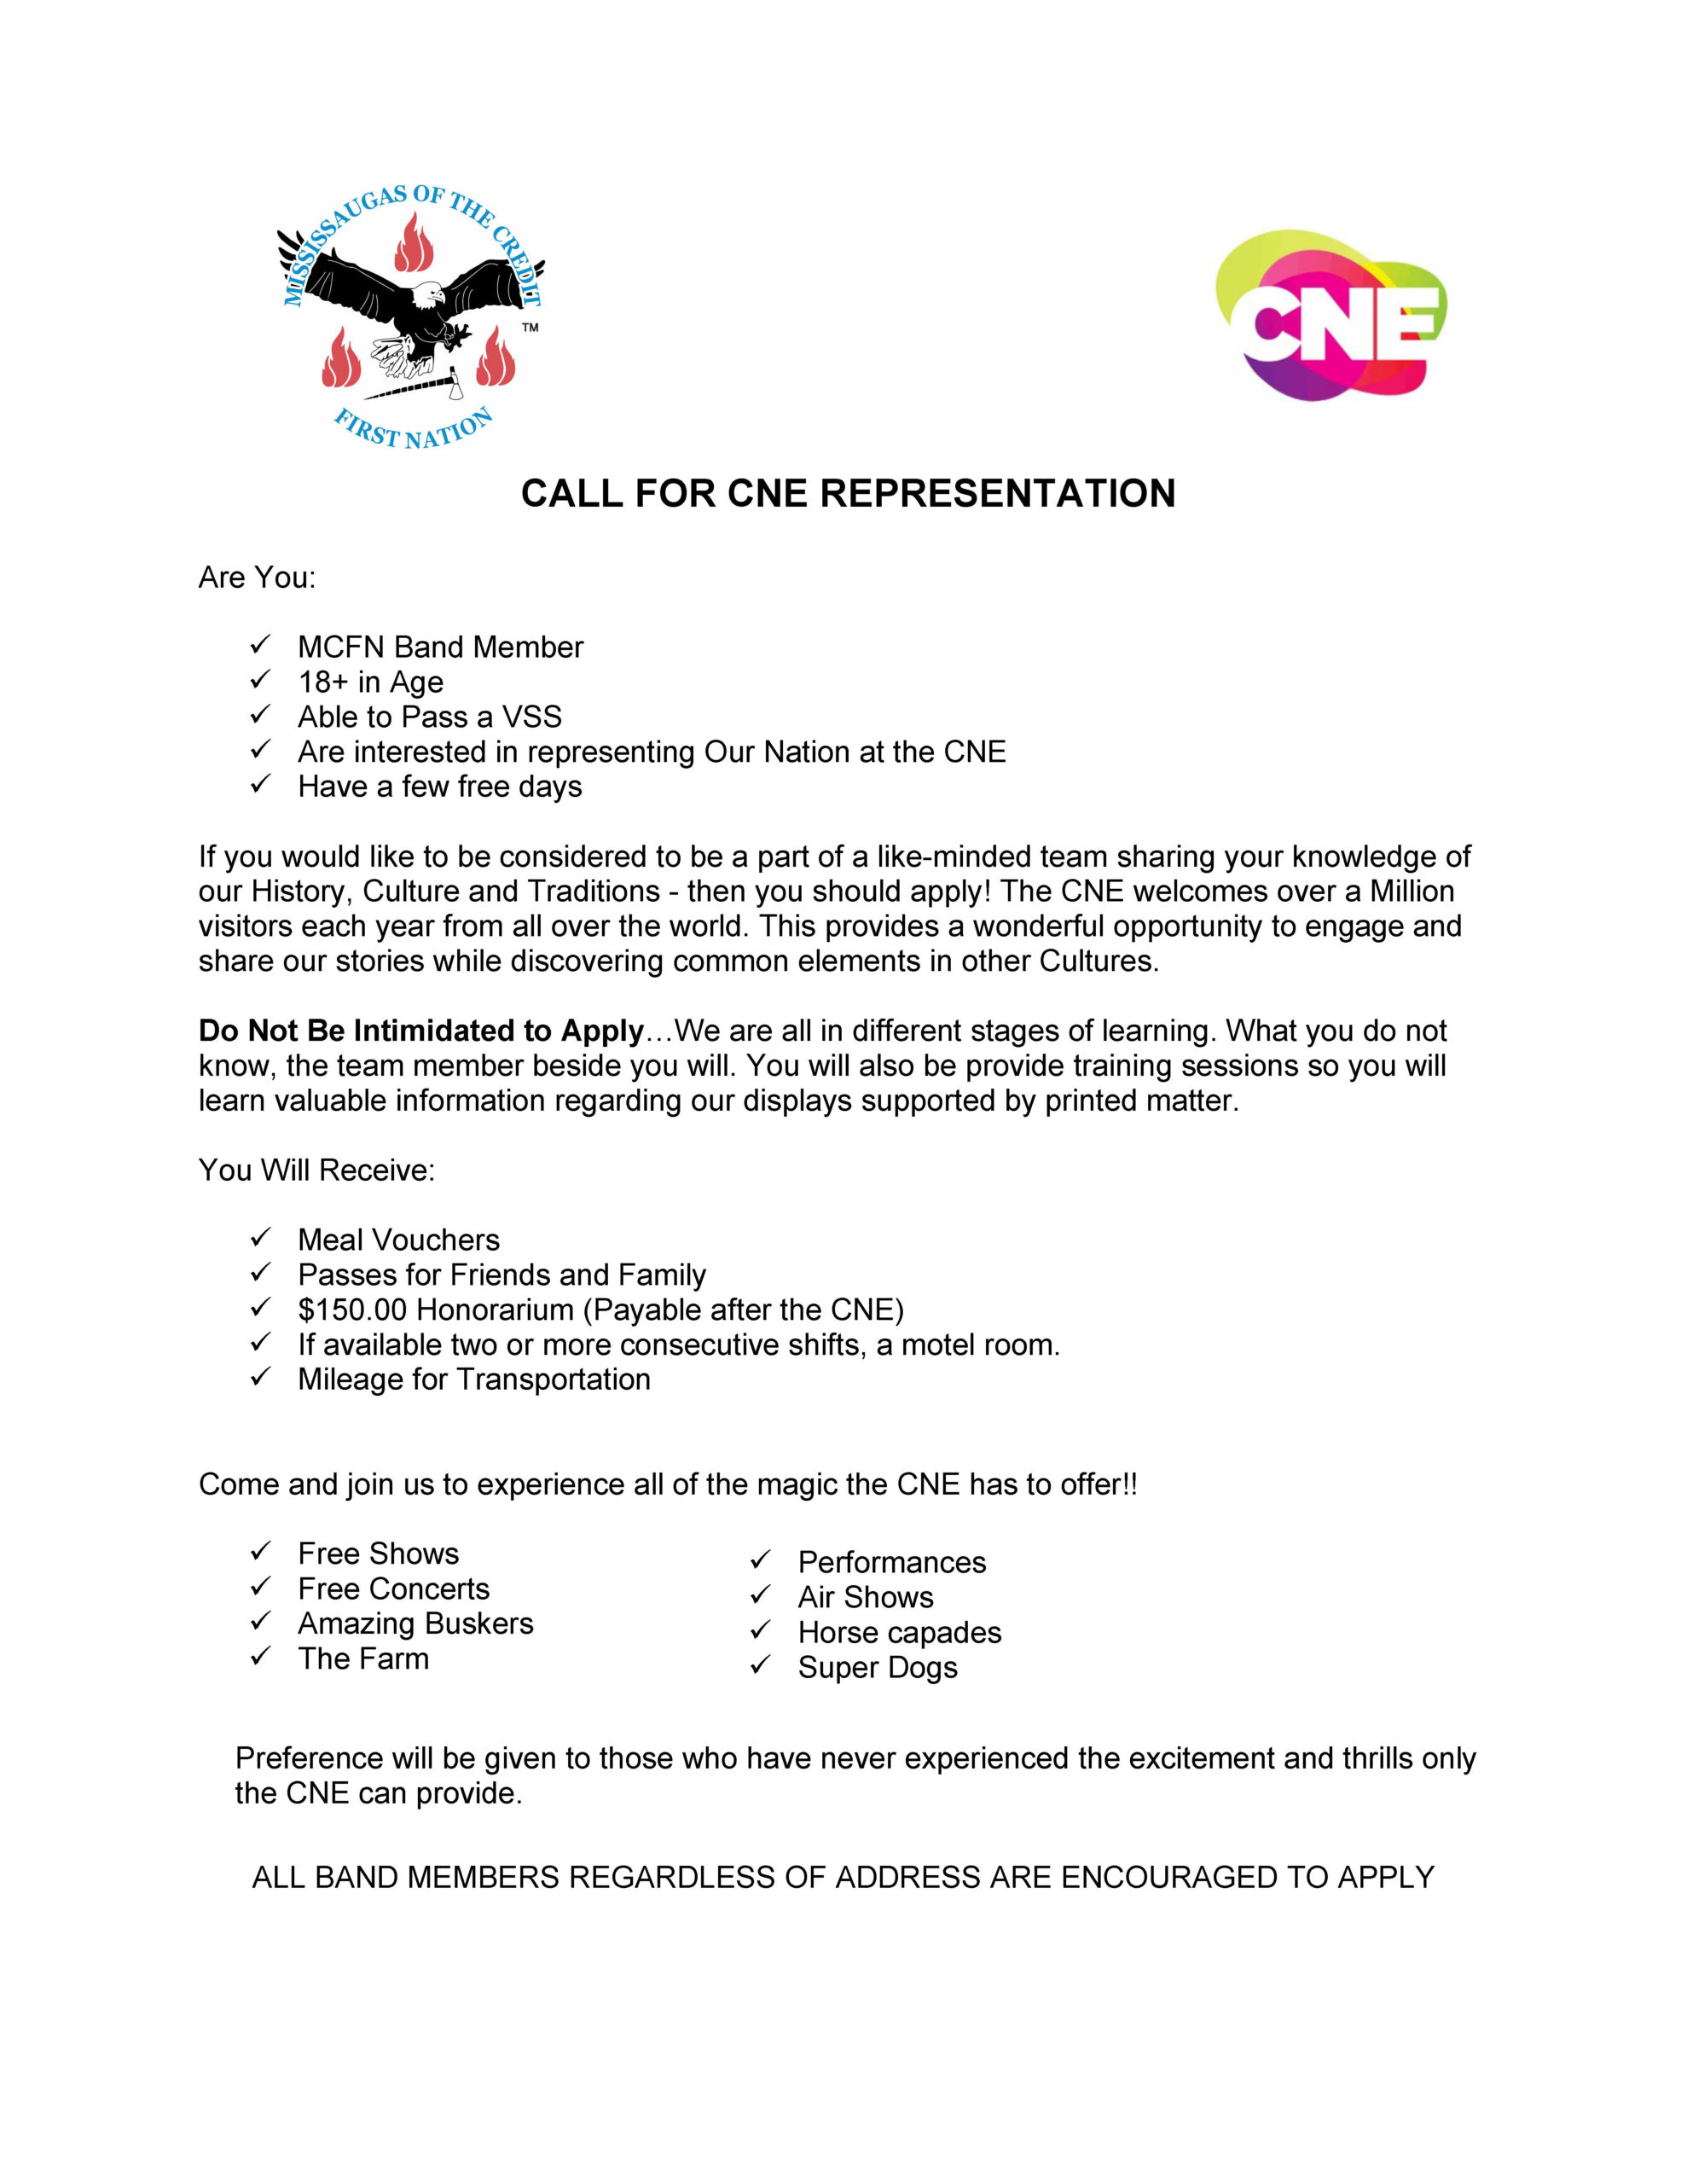 CALL FOR CNE VOLUNTEERS!